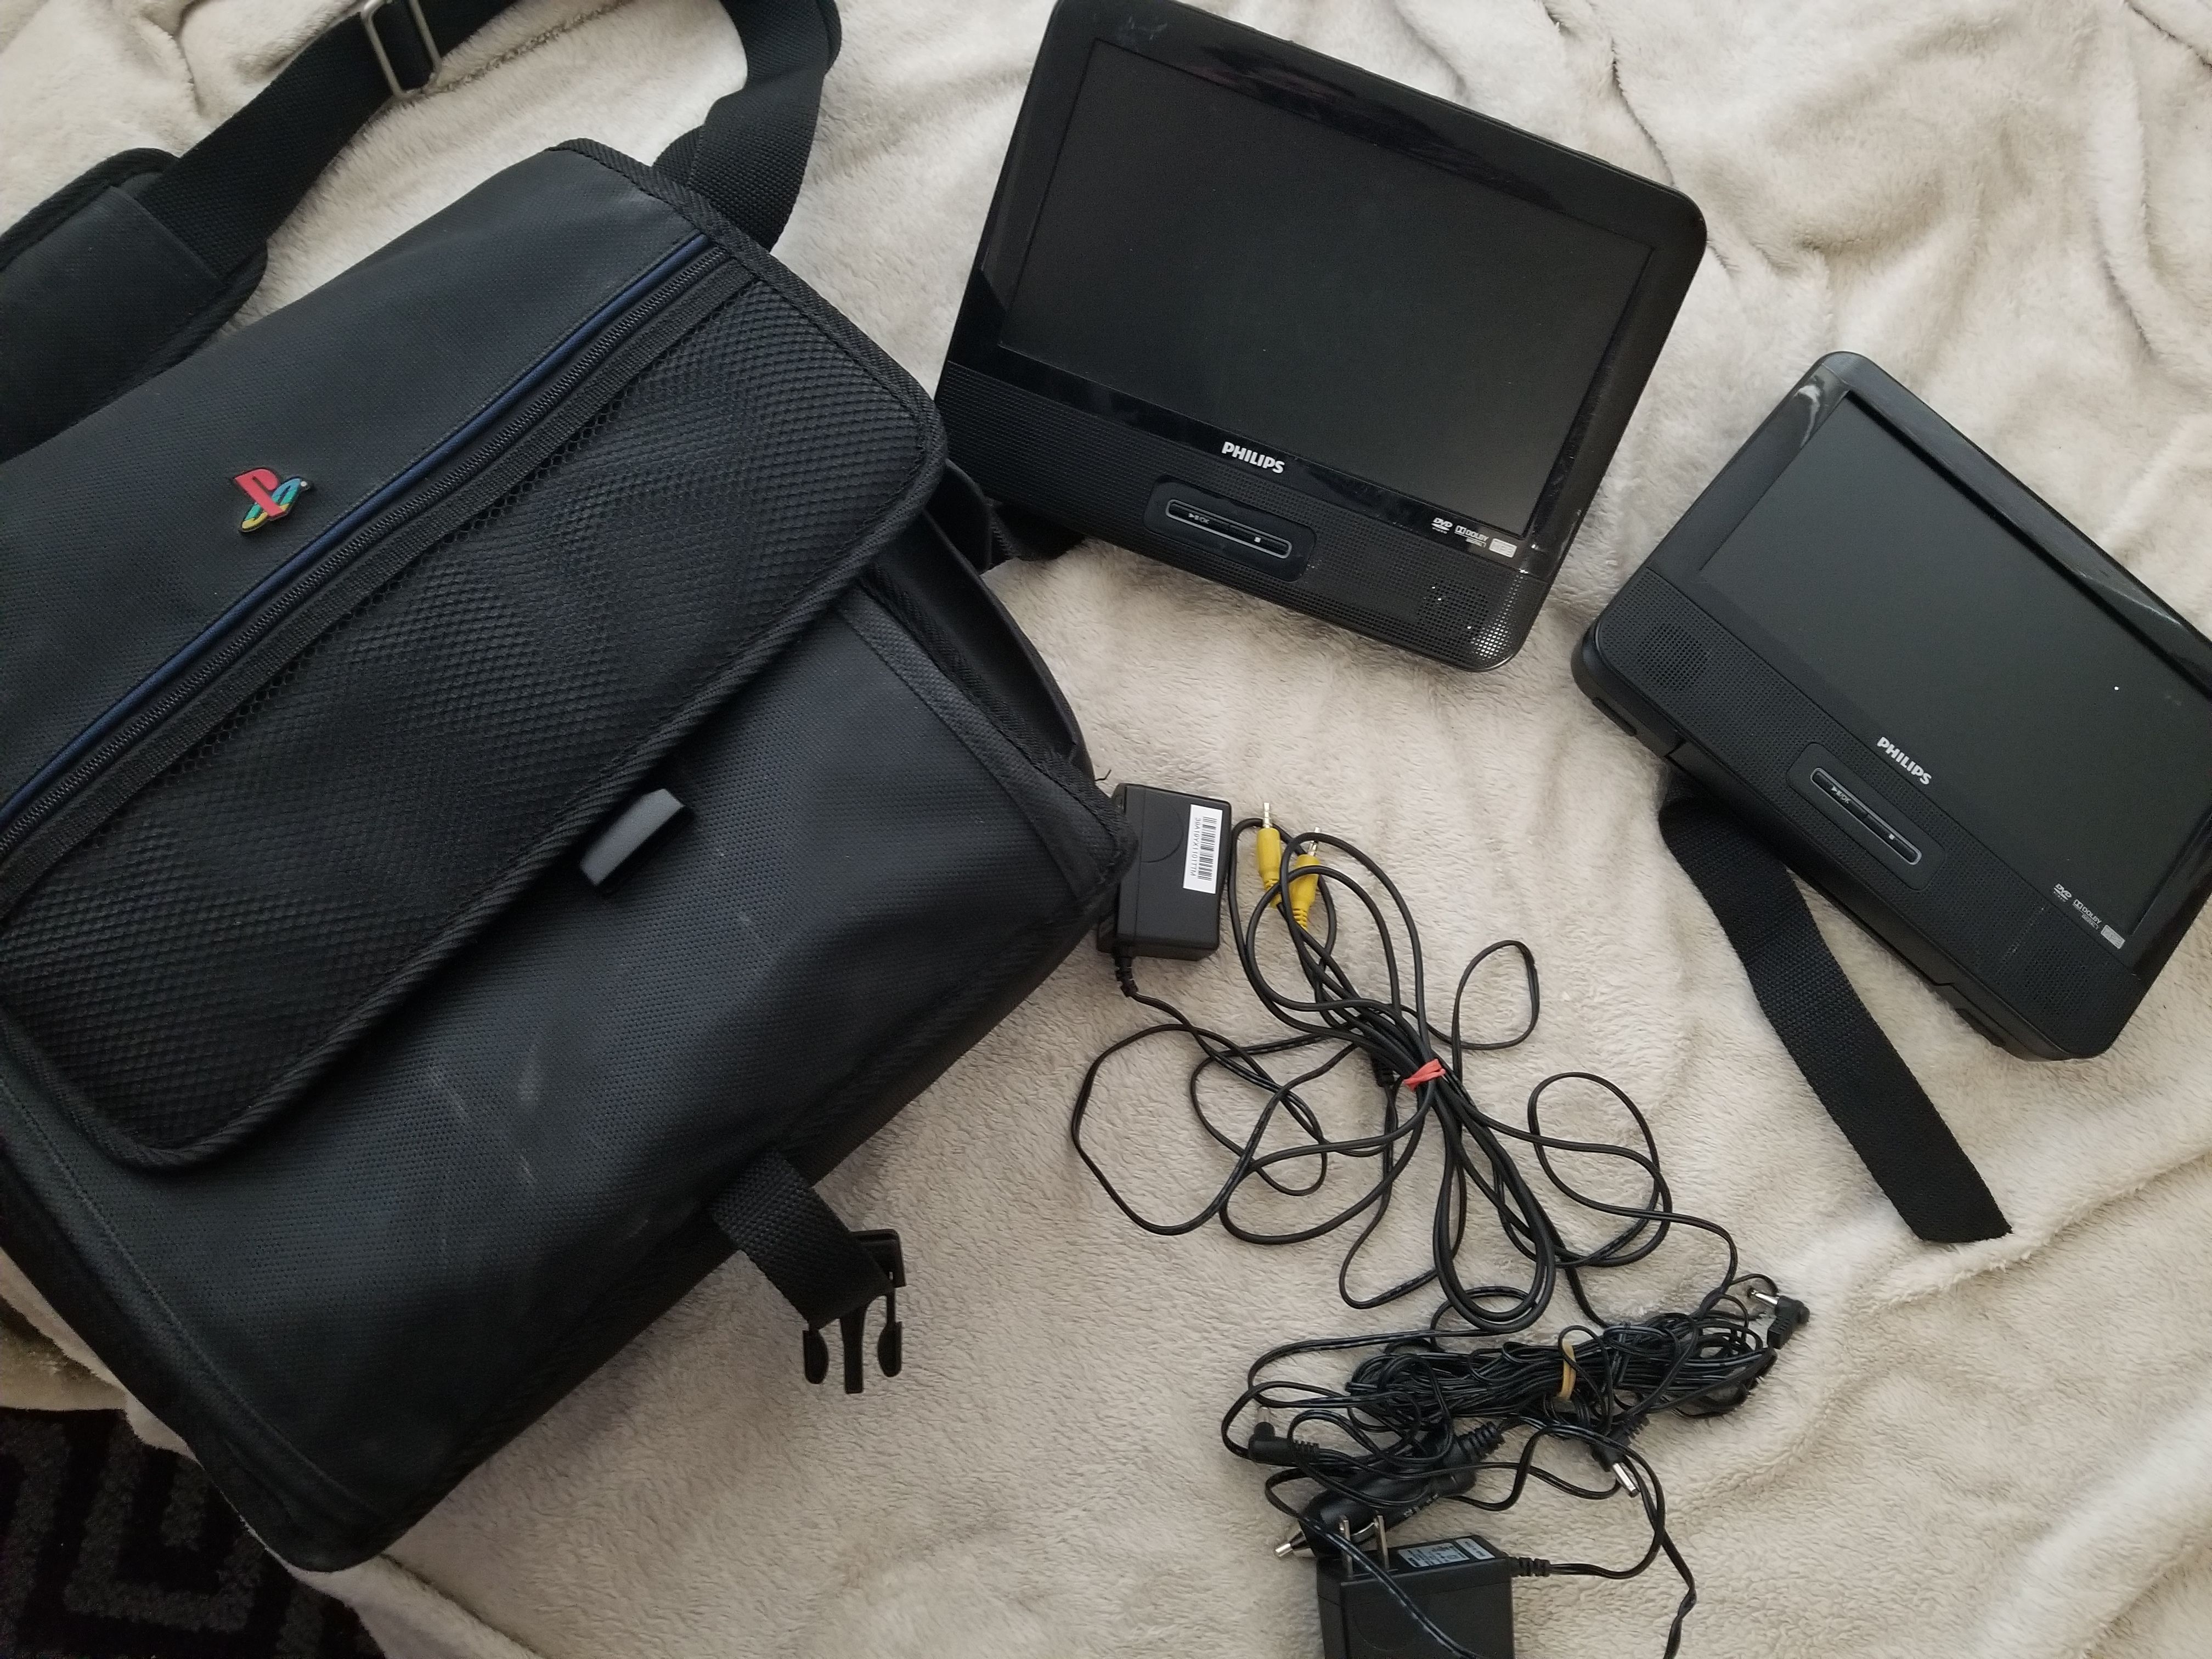 2 Phillips portable DVD players with case $60 for all FIRM Check out my other offers 😉